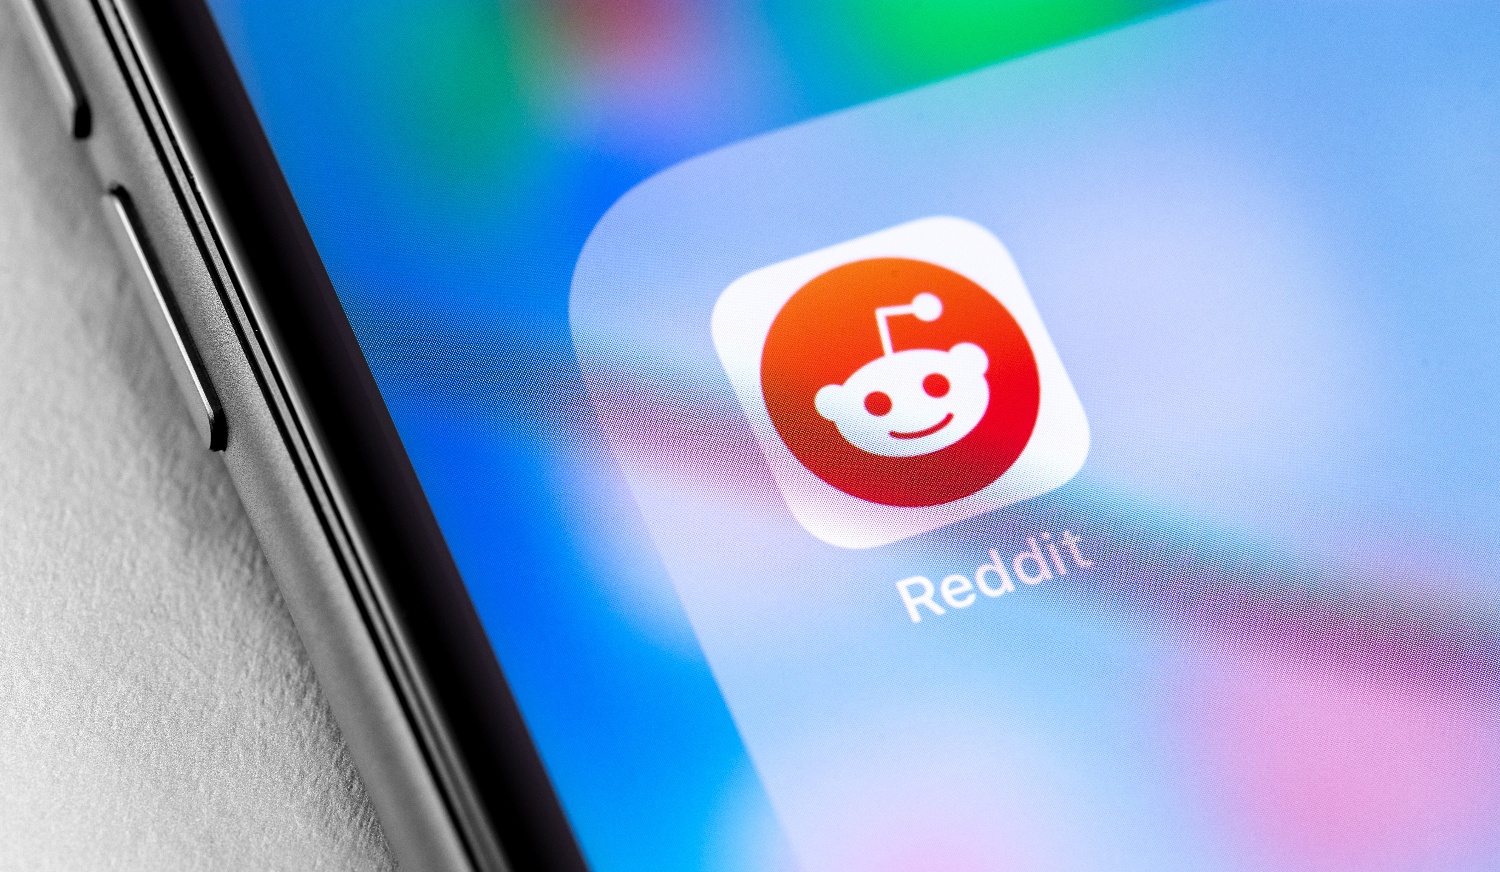 5 Brands Crushing The Reddit Marketing Game 6 Steps To Get You